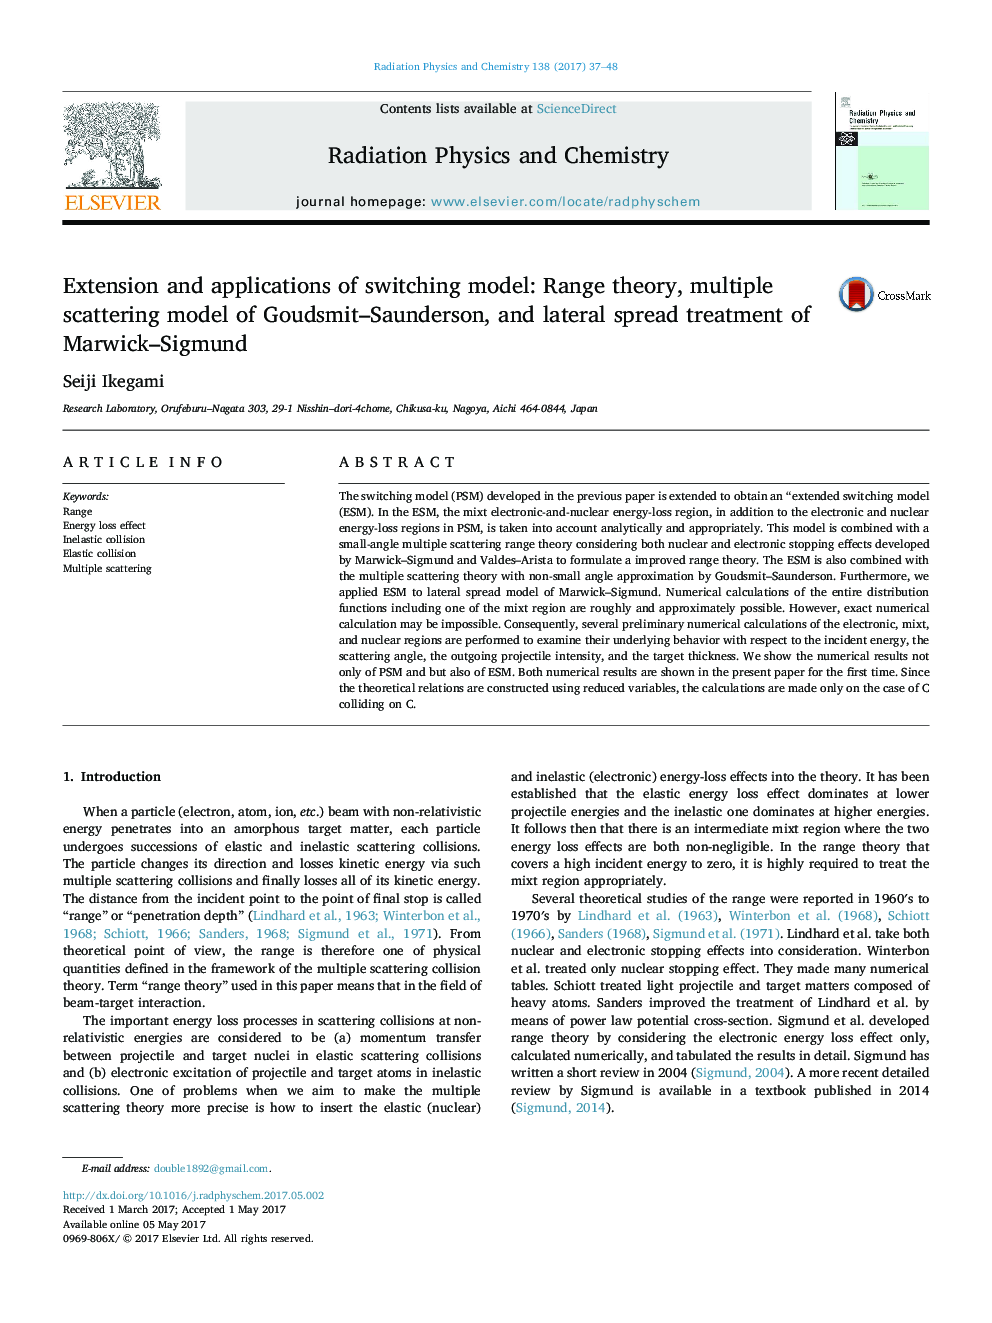 Extension and applications of switching model: Range theory, multiple scattering model of Goudsmit-Saunderson, and lateral spread treatment of Marwick-Sigmund